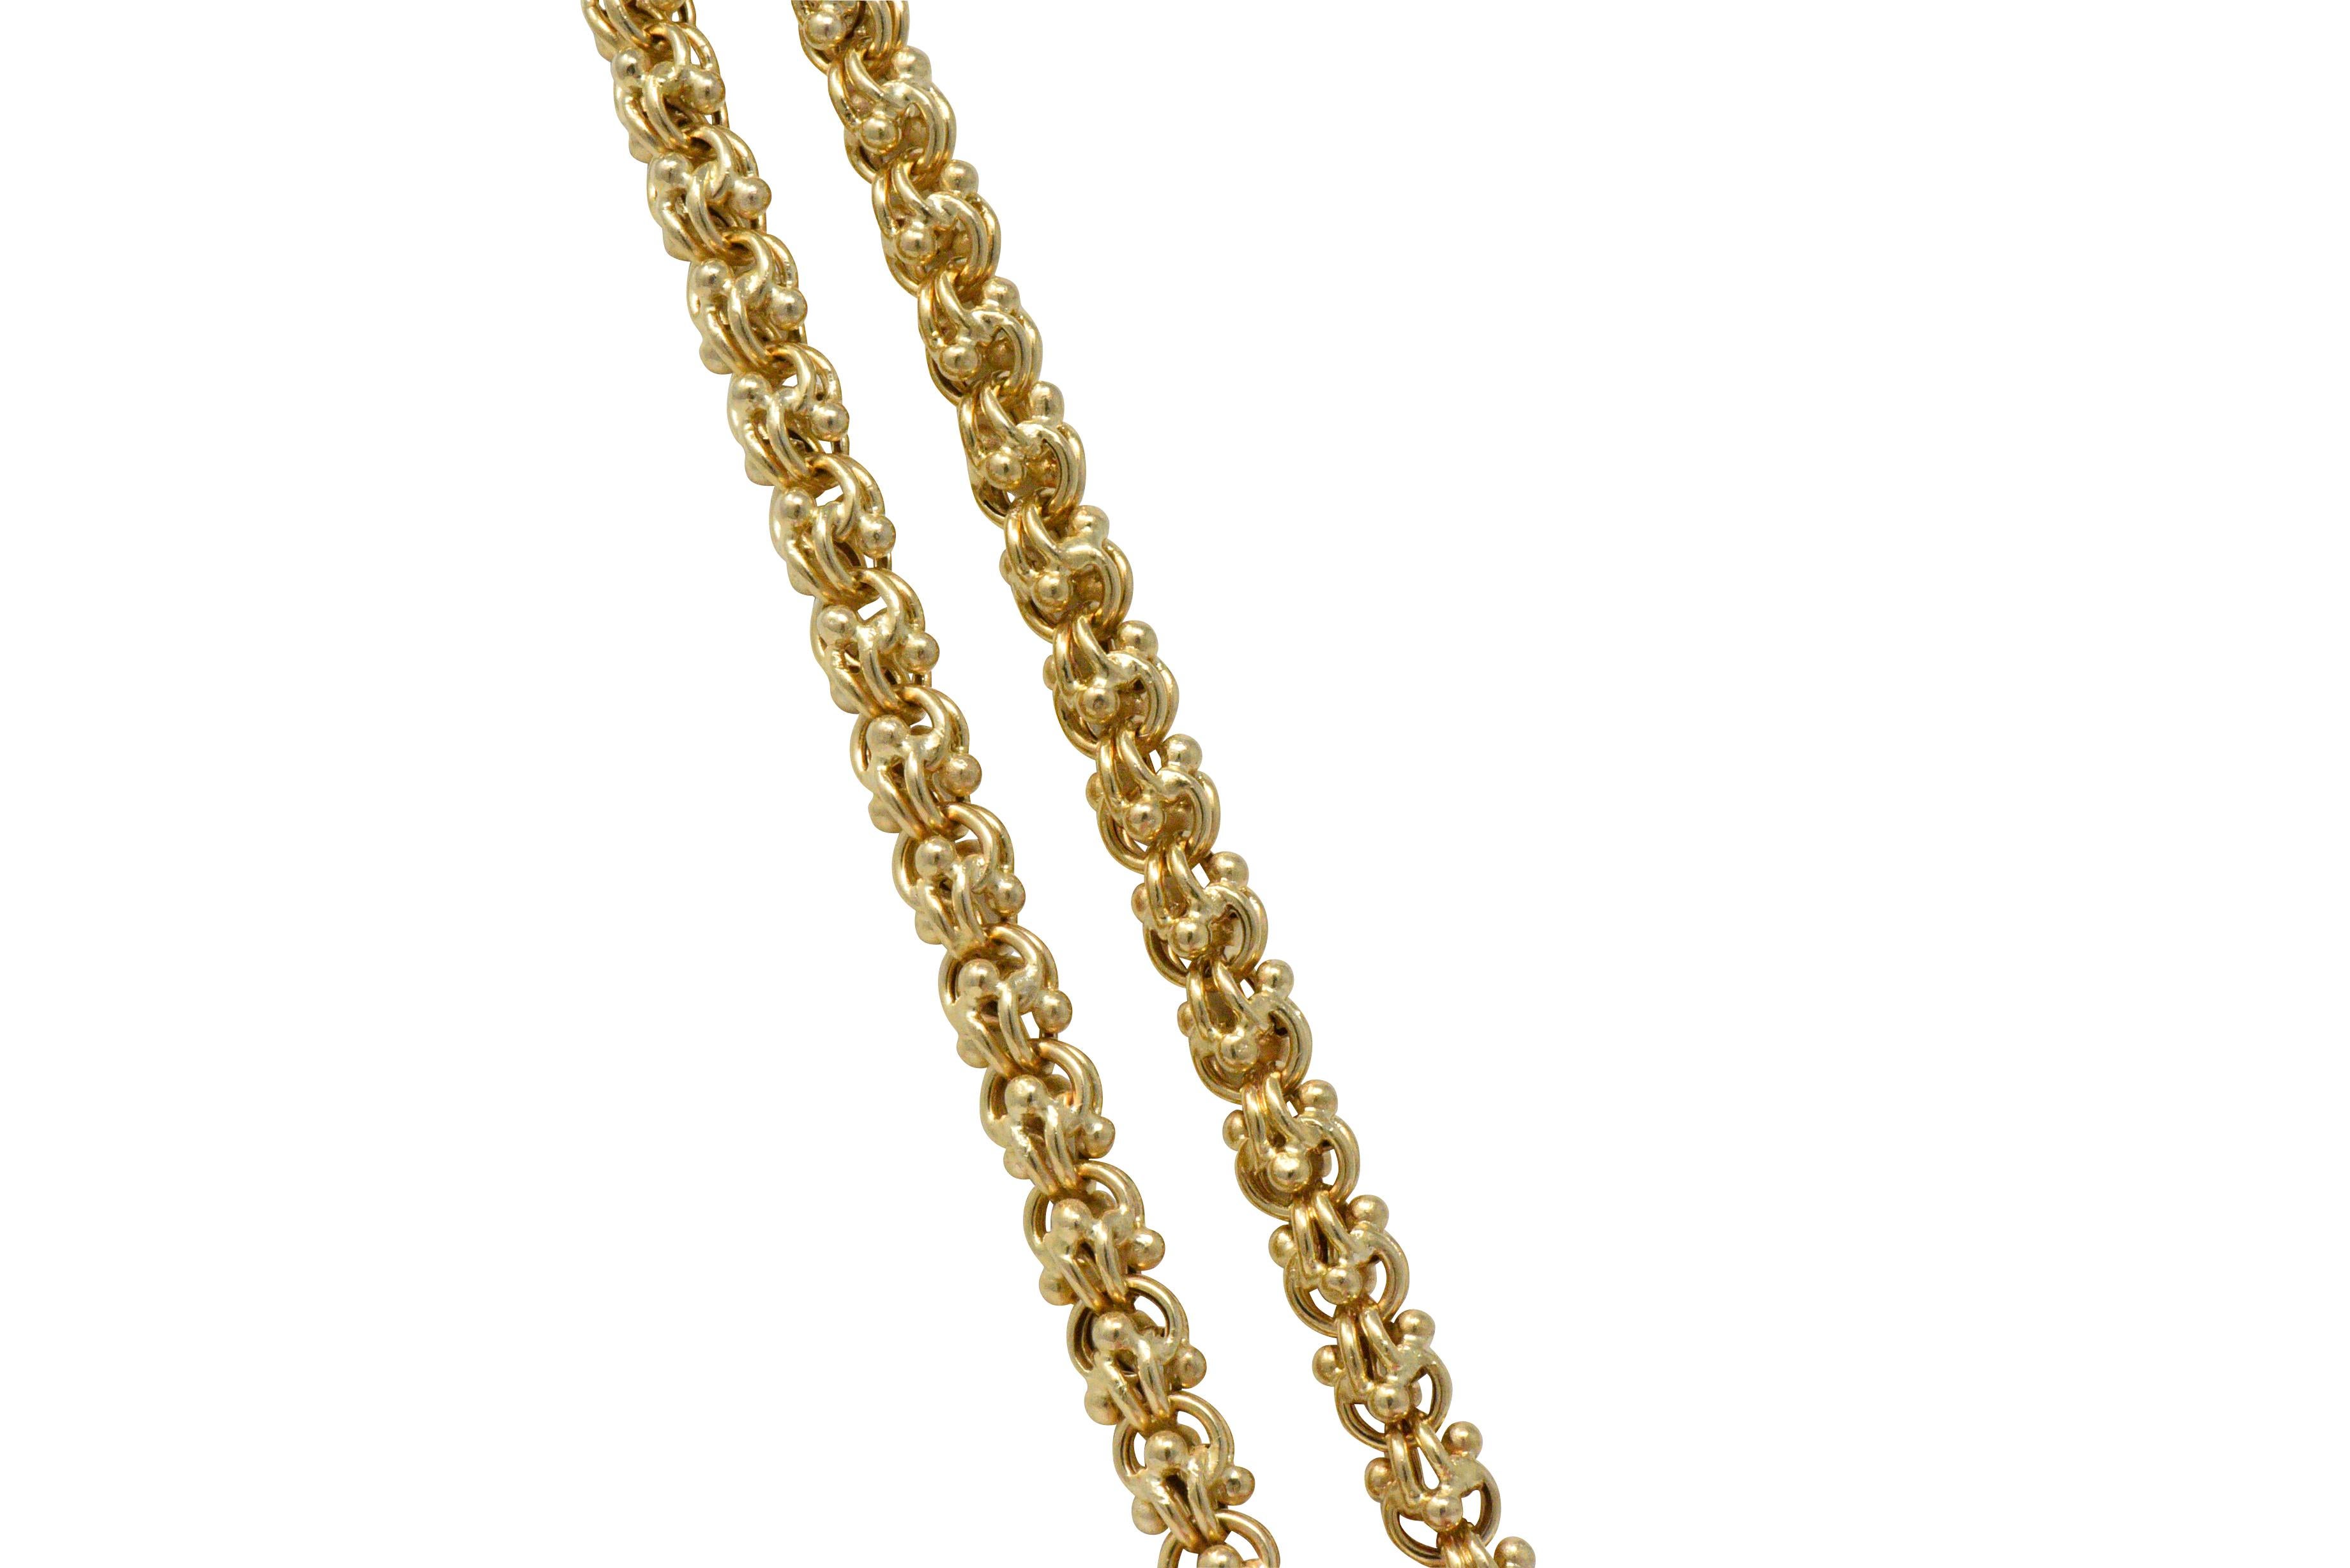 Hollow double round link style chain

Unique gold bead detail

Completed by a spring ring clasp

Stamped 15K

Length: 60 Inches

Width: 1/4 Inch

Total Weight: 128.4 Grams

Bold. Substantial. Statement.  
 
Stock Number:We- 2638